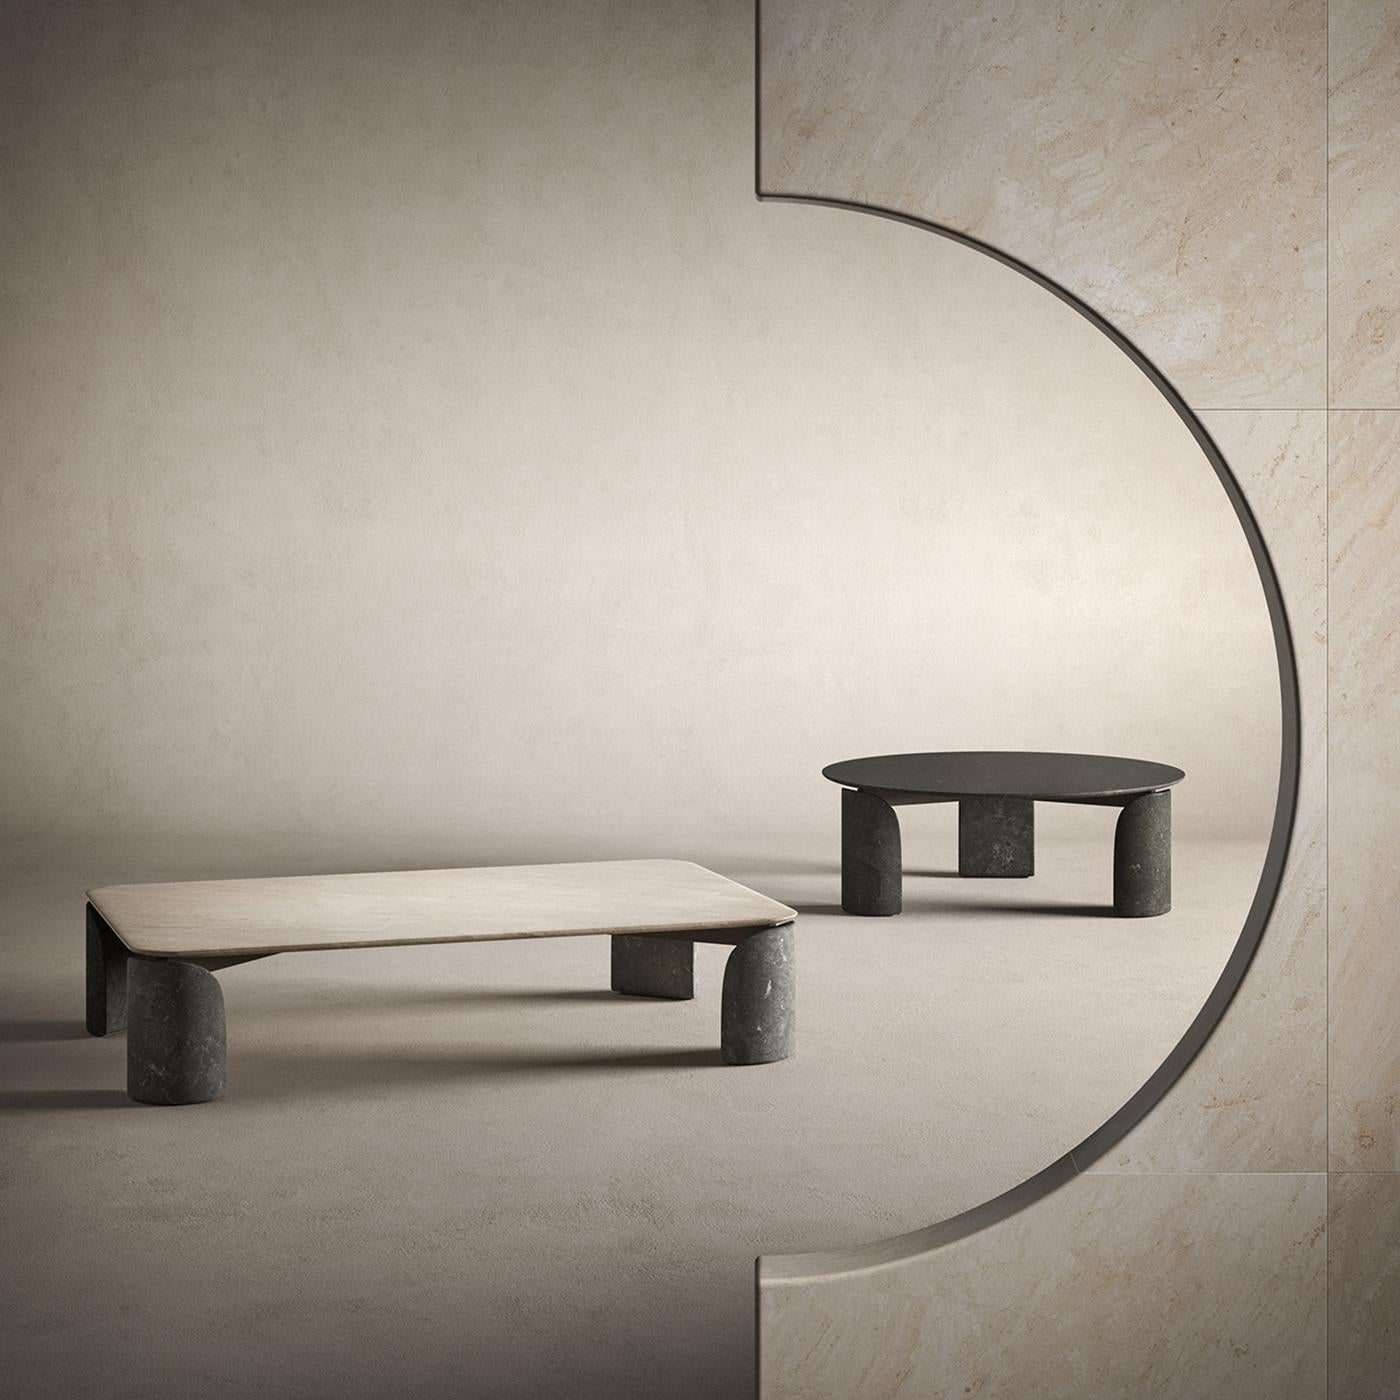 Rounded edges and curved profiles soften the general rigor of this coffee table, crafted using precious Avola stone for the curved legs and beige-toned Crema d'Orcia for the top. Its generous dimensions allows one to comfortably enjoy an afternoon